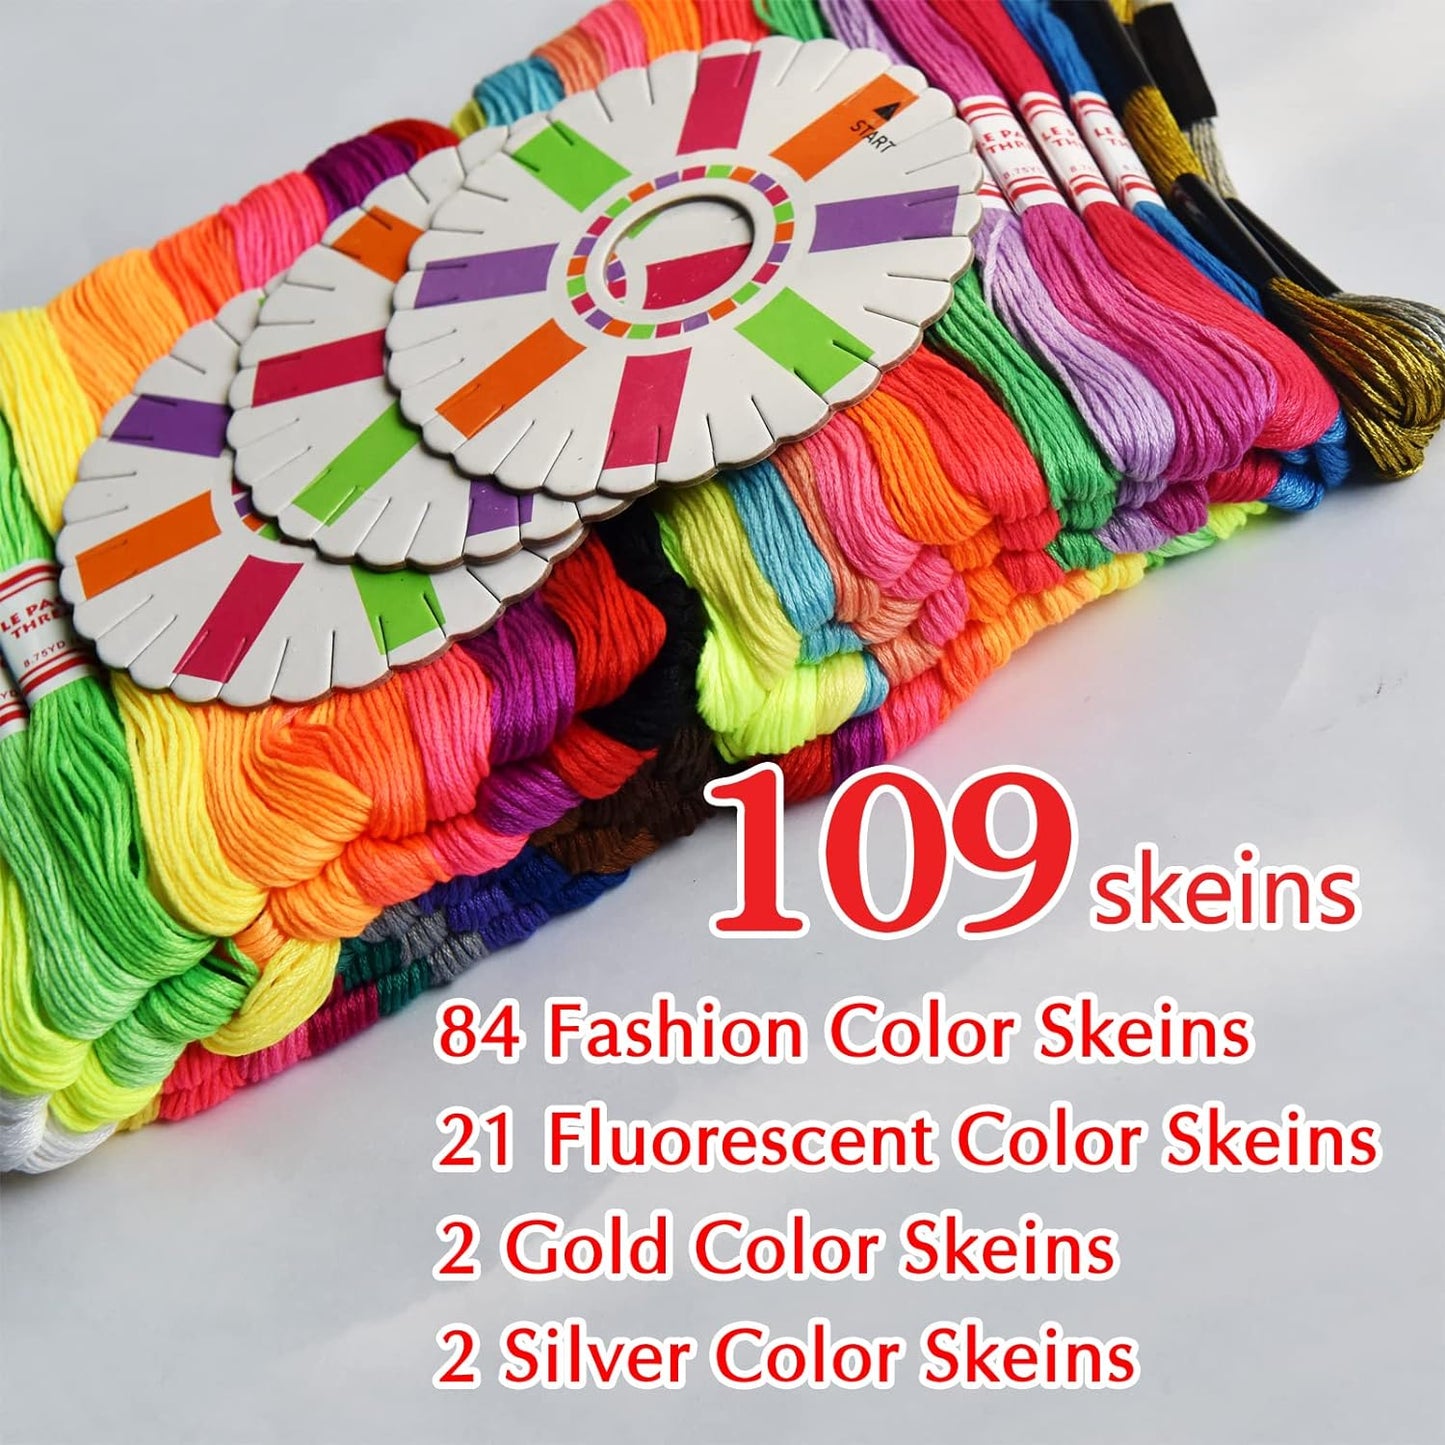 Embroidery Floss Rainbow Color 109 Skeins per Pack Cross Stitch Threads Friendship Bracelets Floss Crafts Floss with 3 Weaved Plate（105 Pcs Embroidery Floss +4 Metallic Embroidery Thread